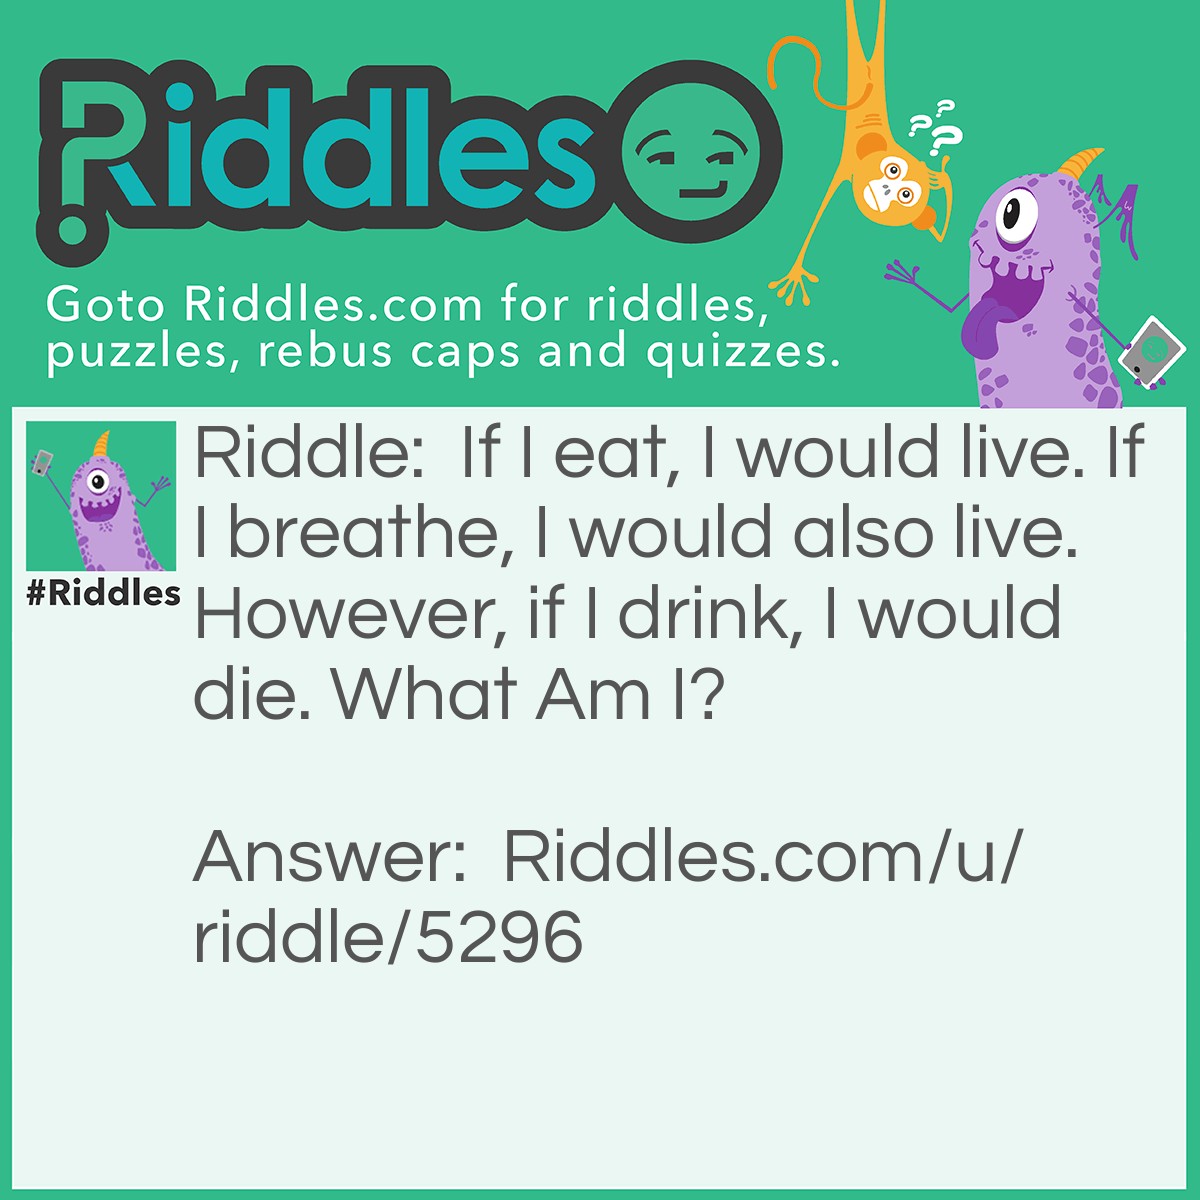 Riddle: If I eat, I would live. If I breathe, I would also live. However, if I drink, I would die. What Am I? Answer: I'm fire.